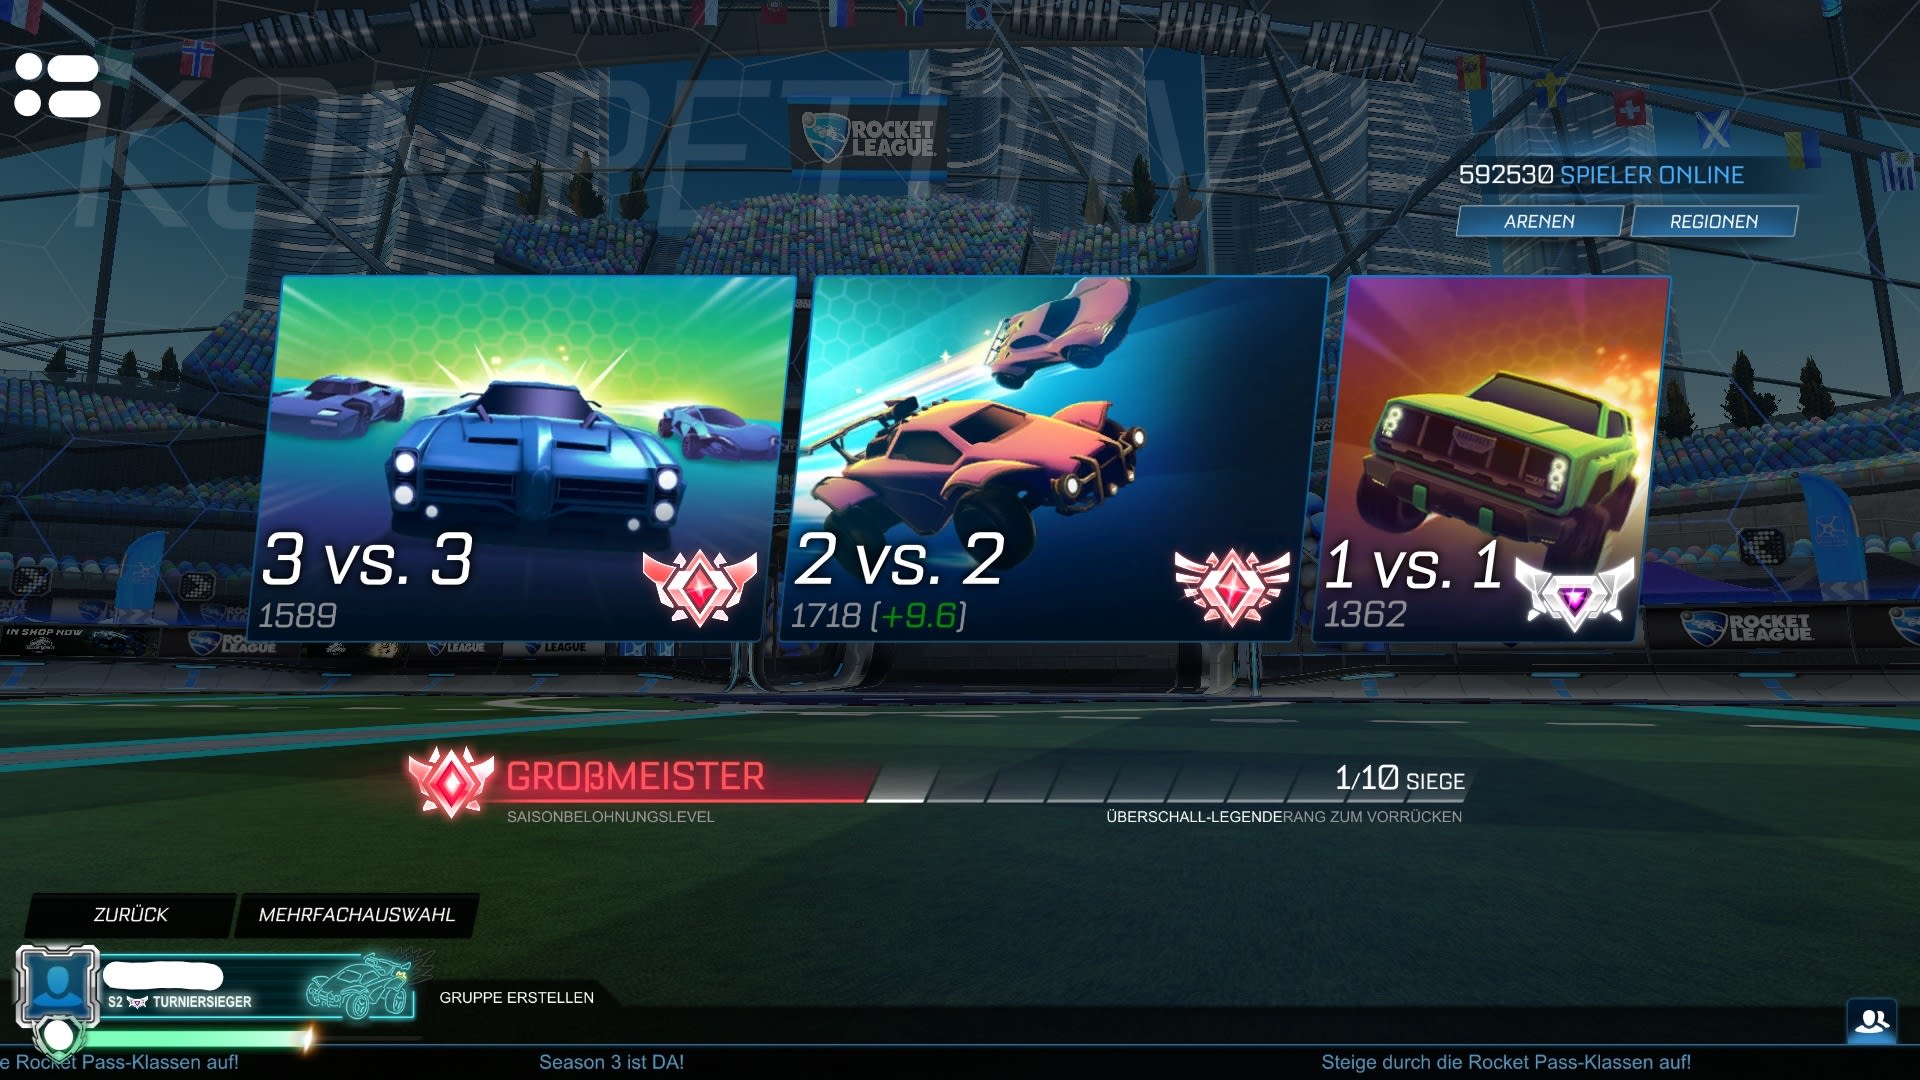 How To Create Tournaments on Rocket League 